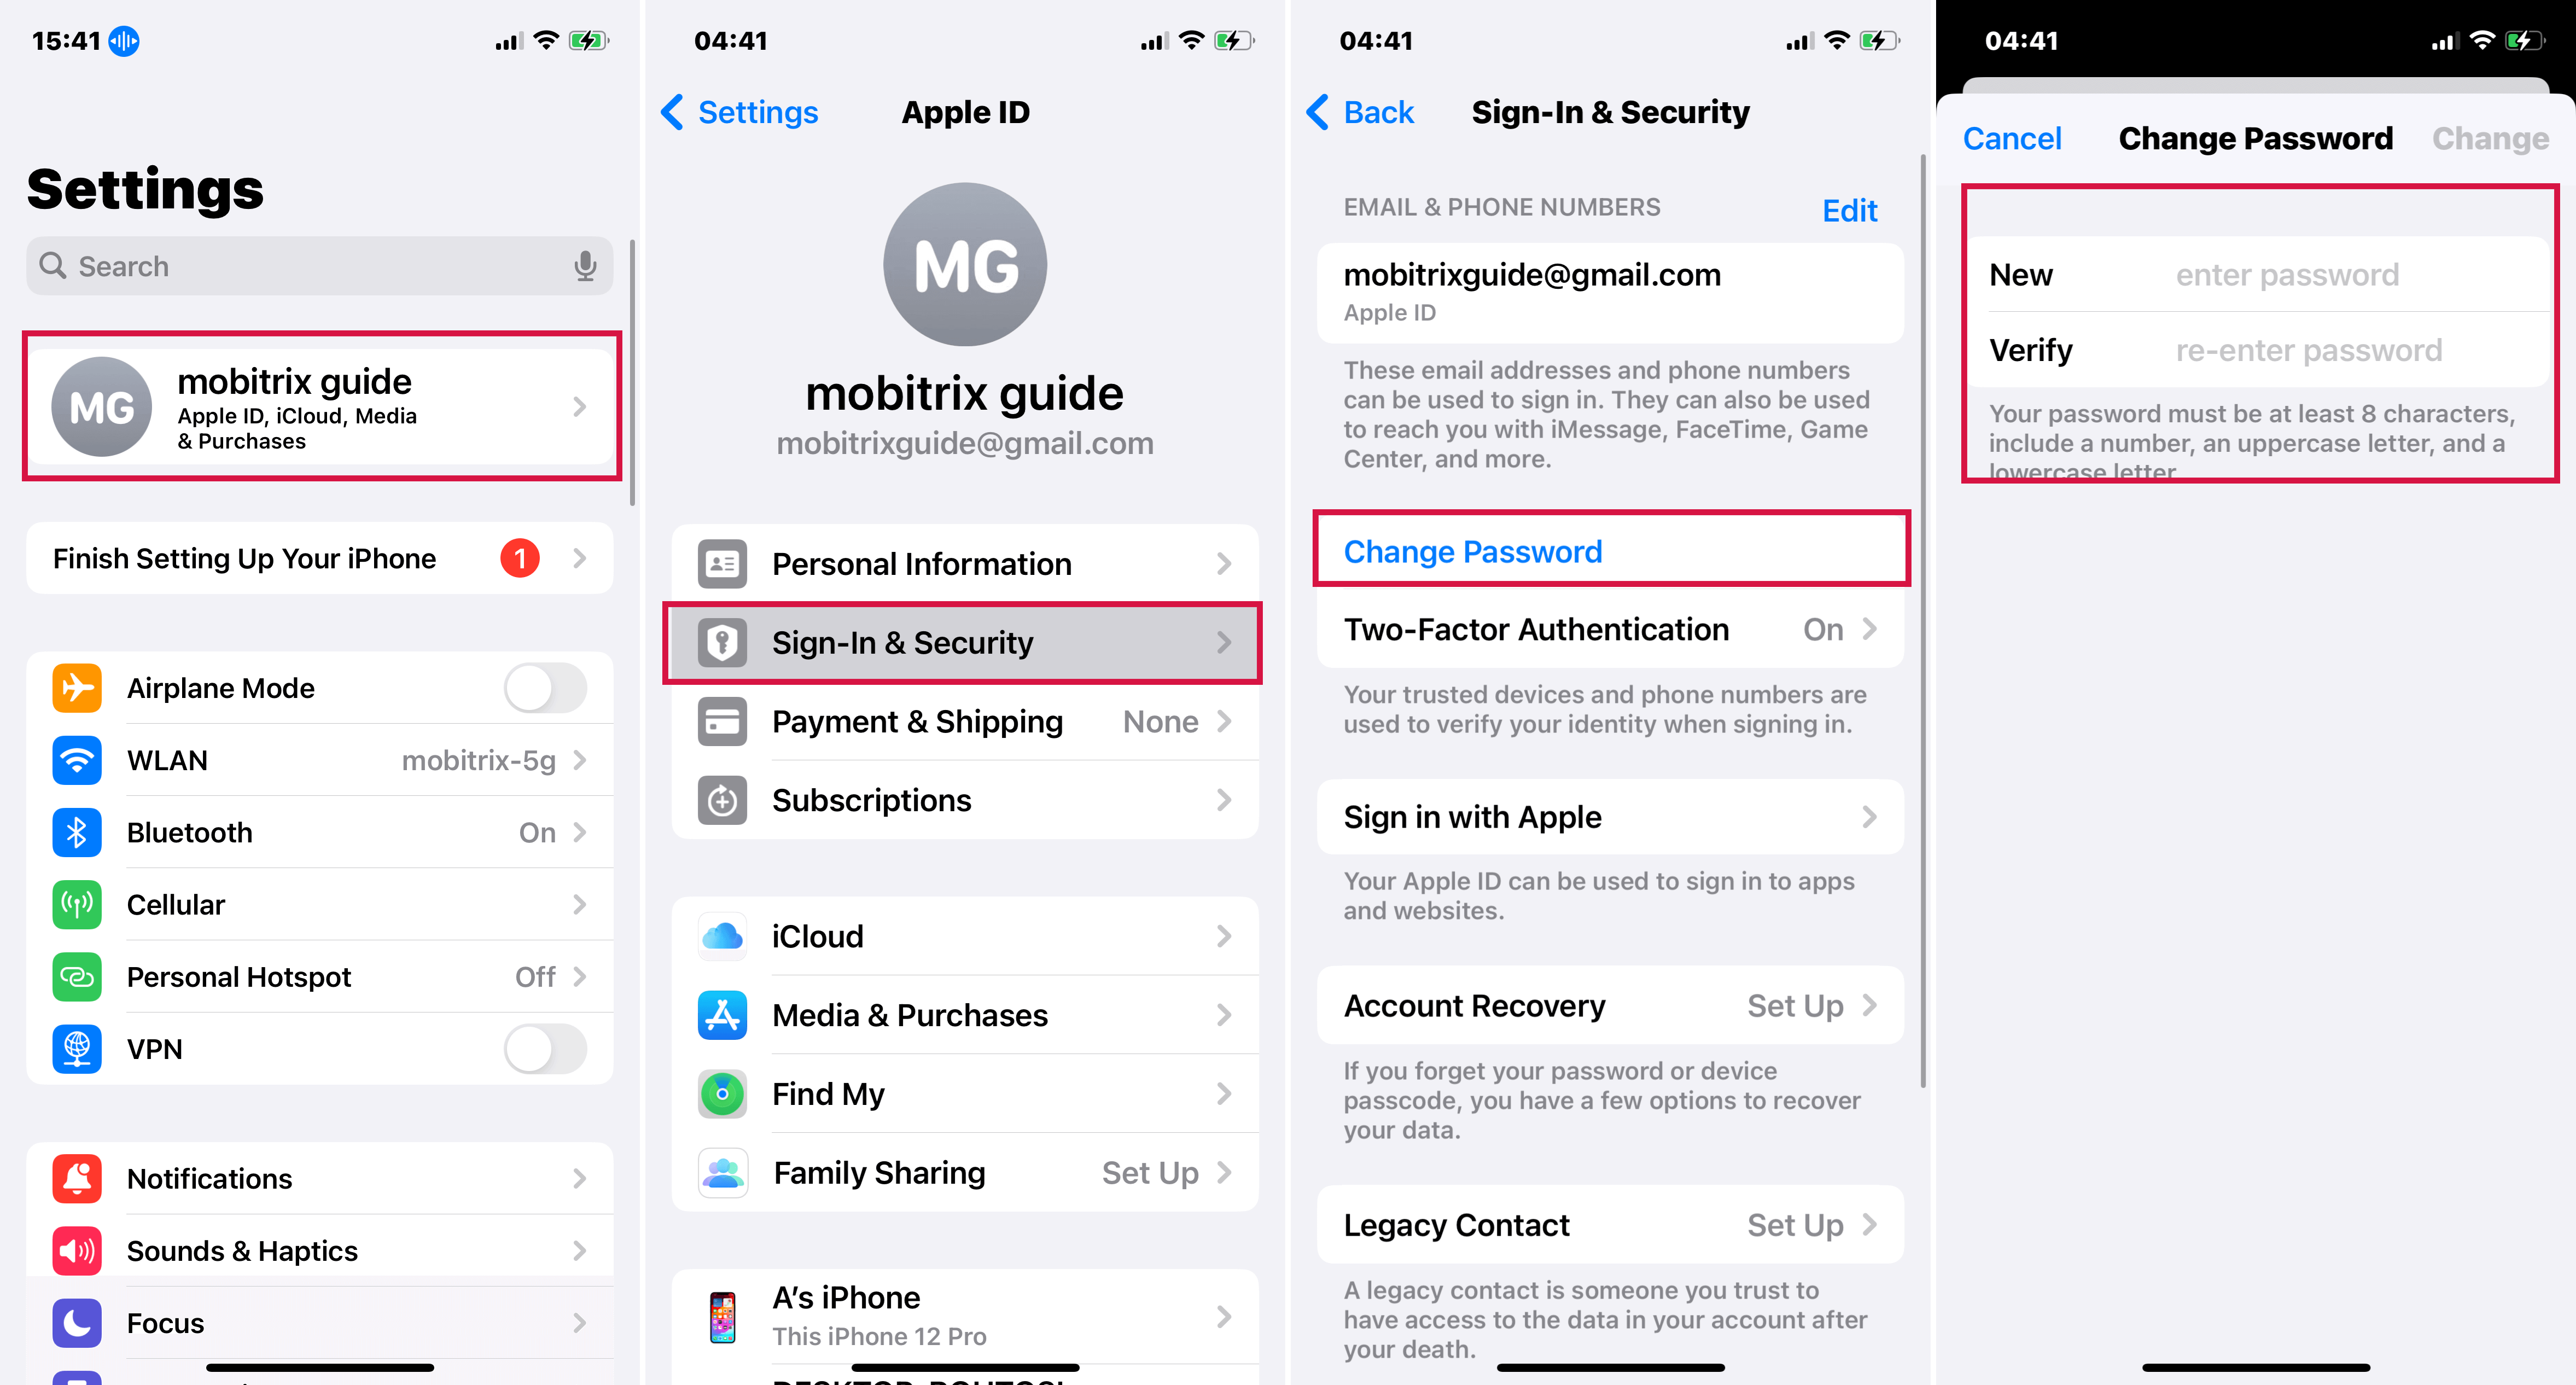 HOW TO CHANGE YOUR APPLE ID PASSWORD